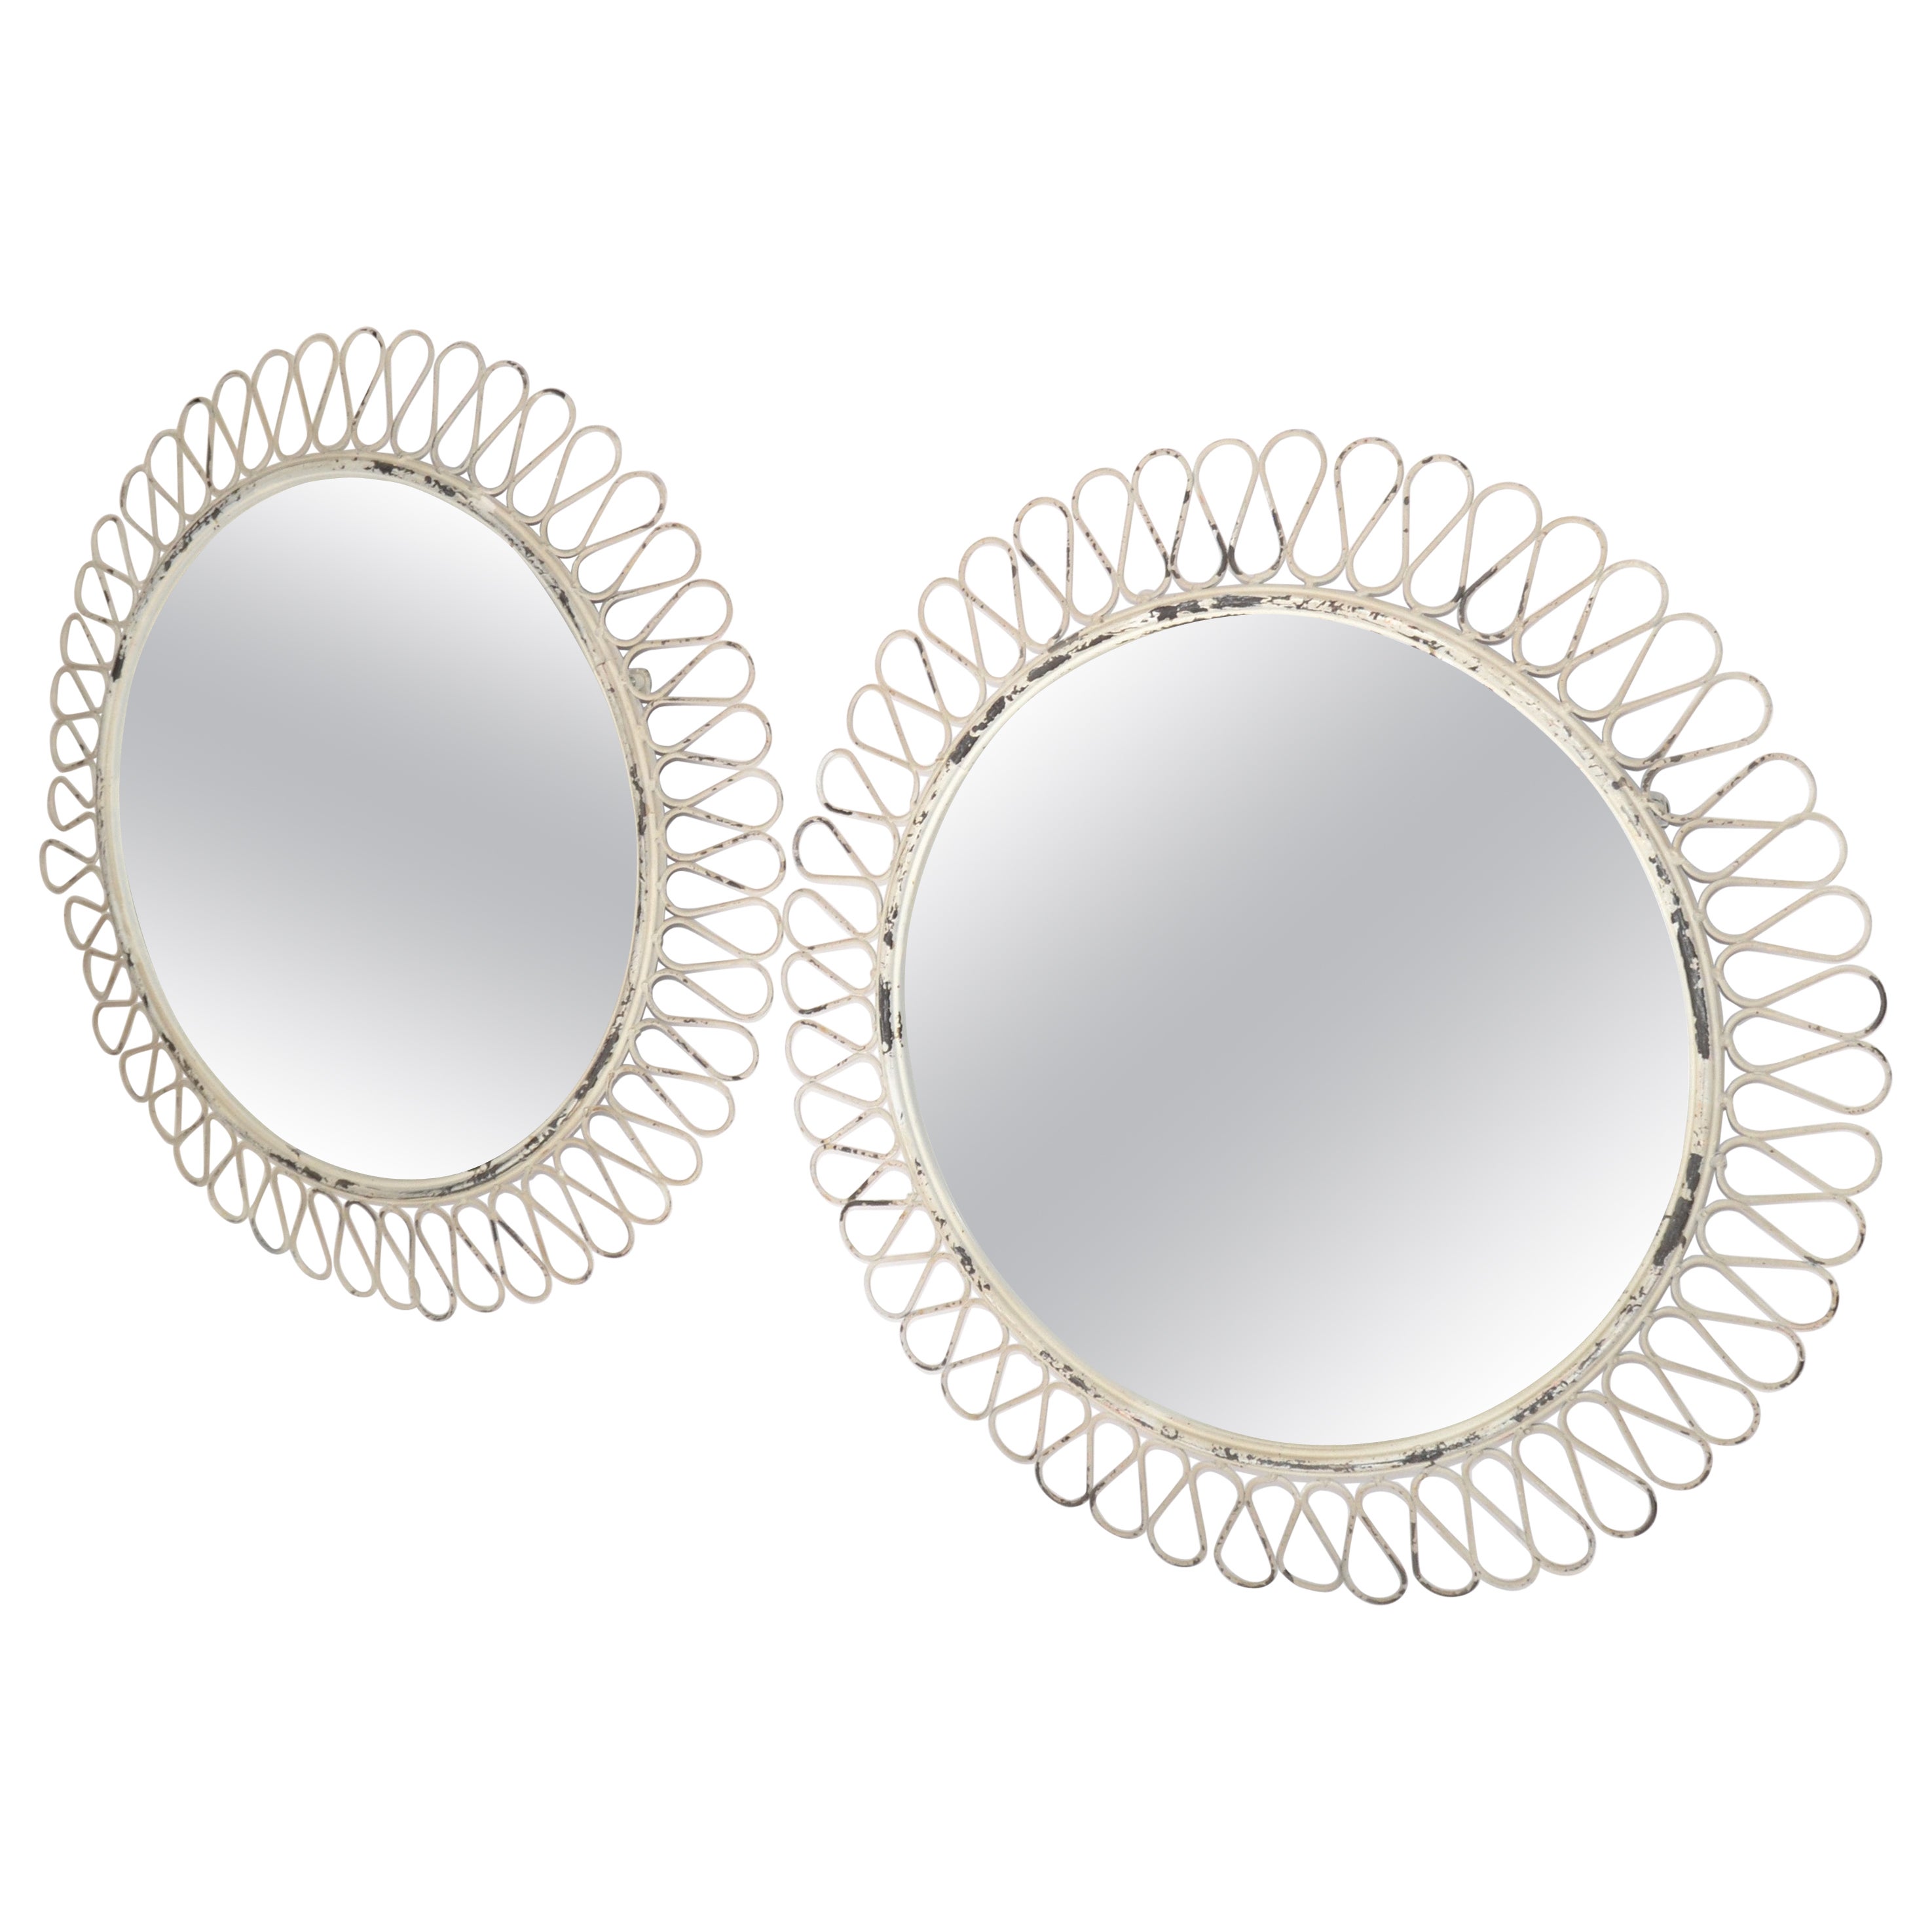 Pair, French Round Wrought Iron Wall Mirror Art Deco Style White Distressed Look For Sale